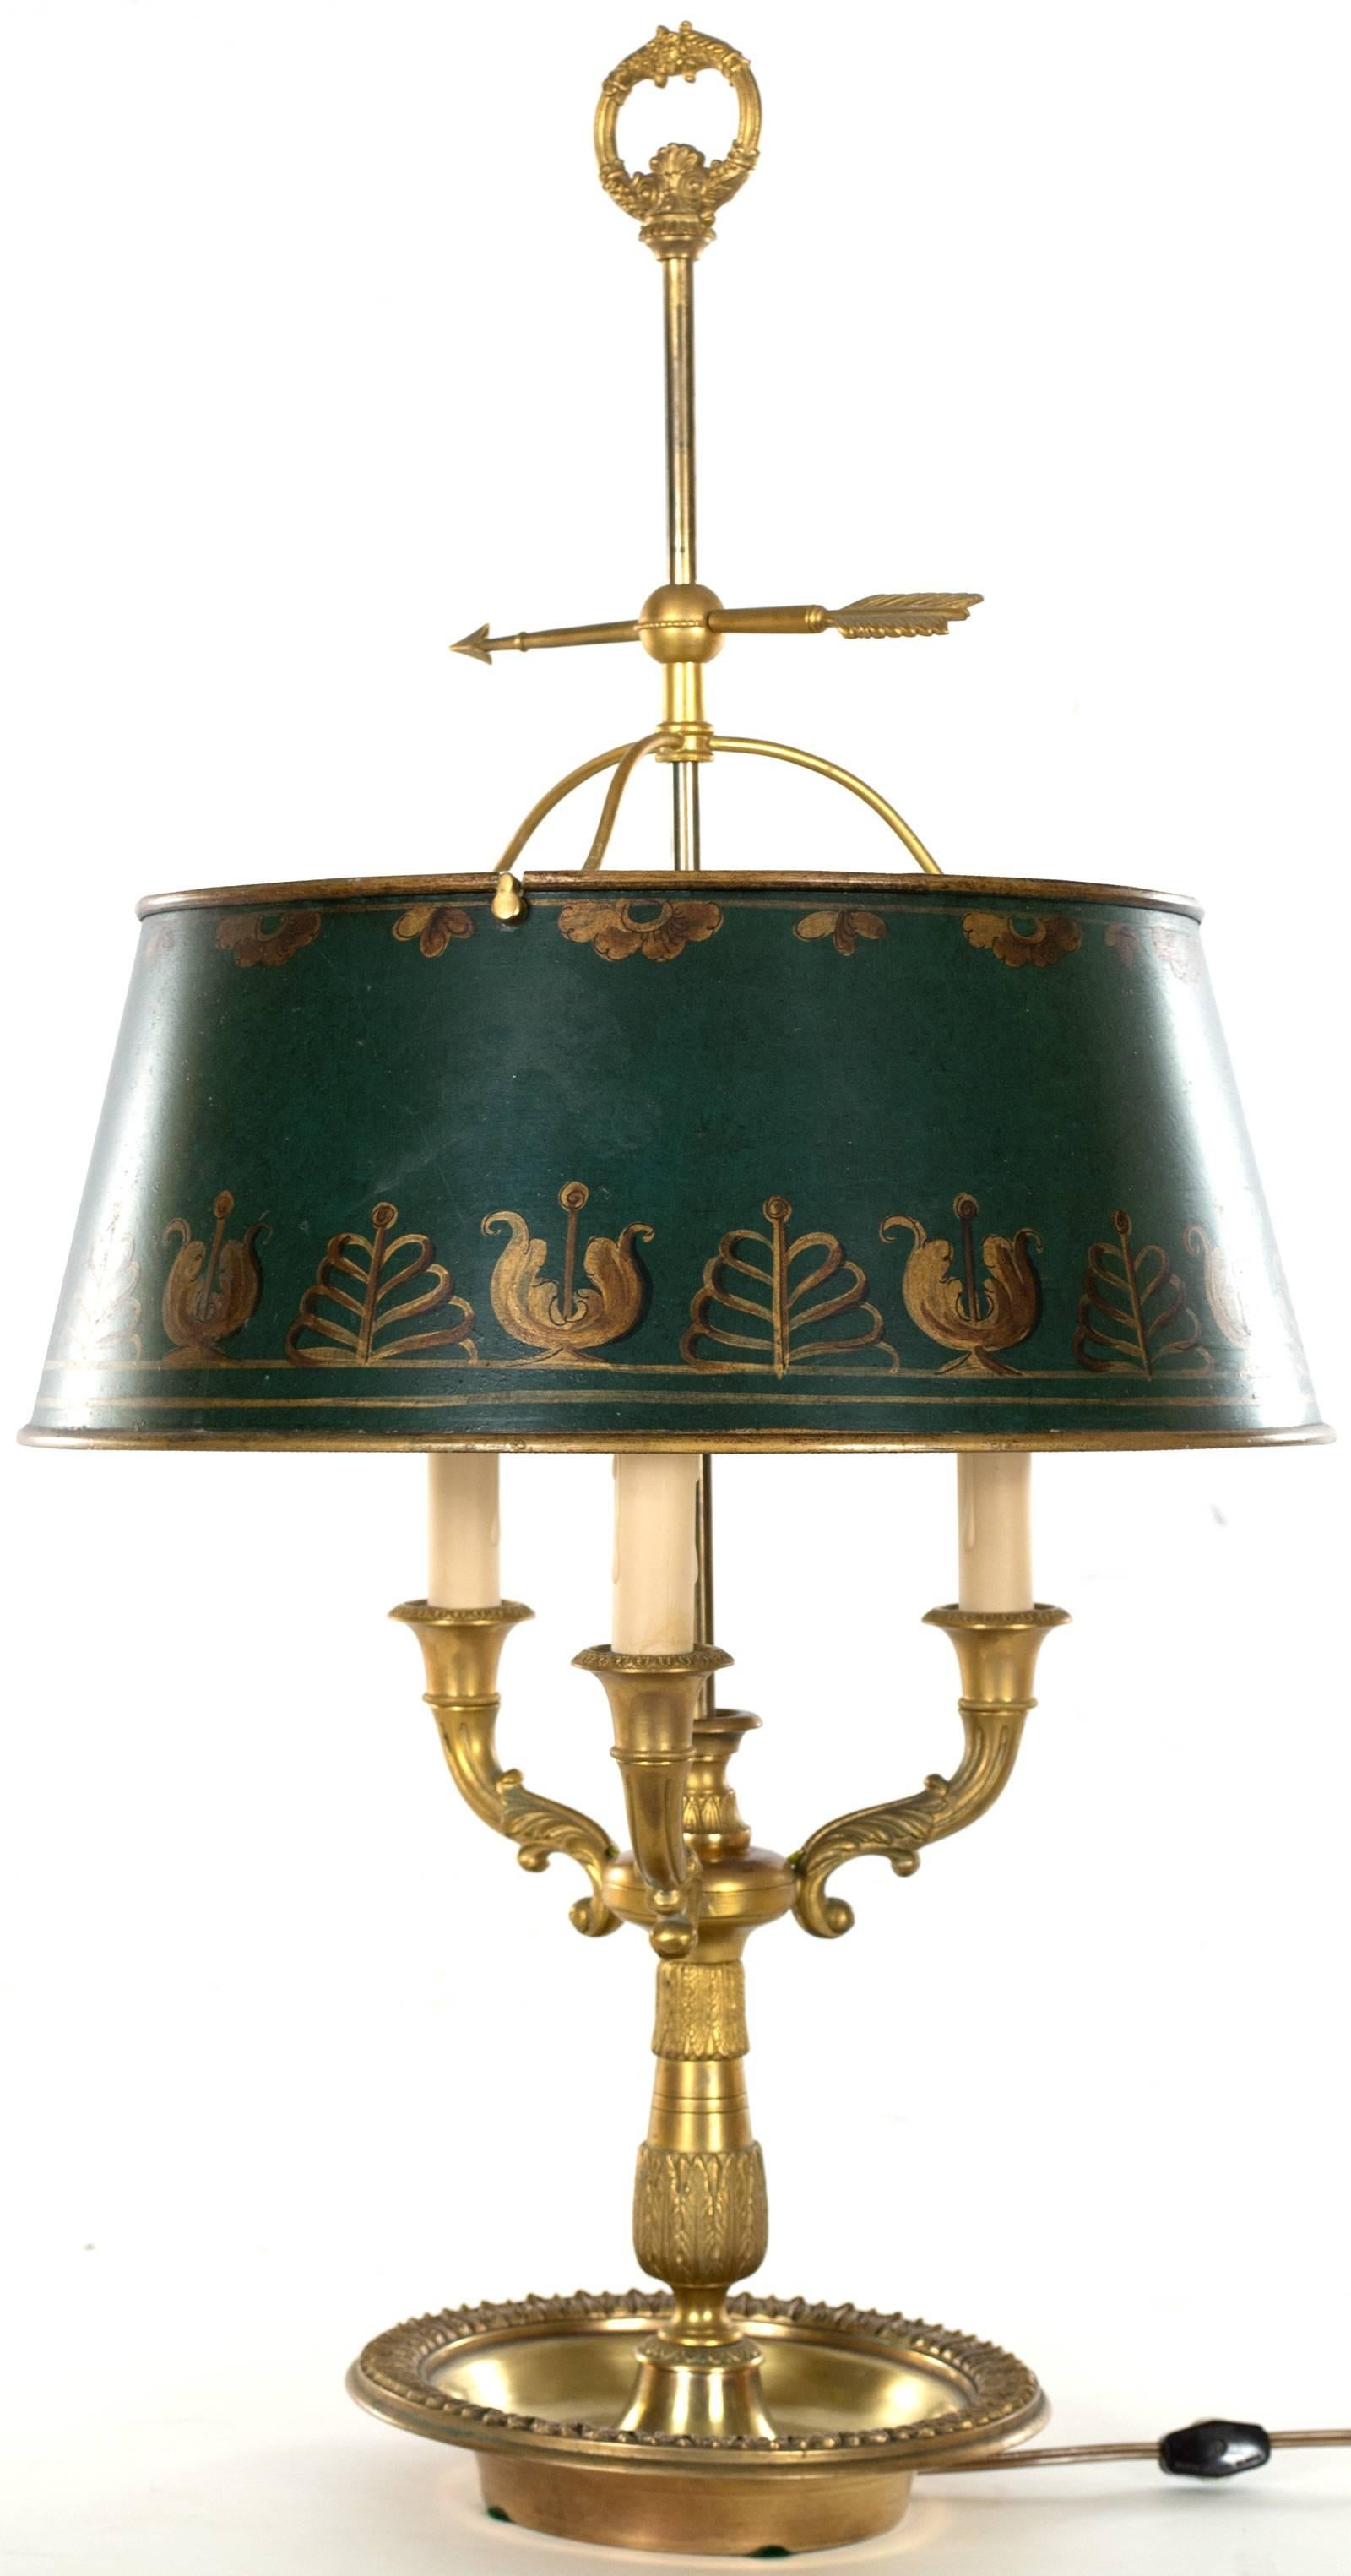 A charming table lamp in the form of a three-armed candelabra, with a green painted and gilt metal shade, made in England during the third quarter of the nineteenth century.